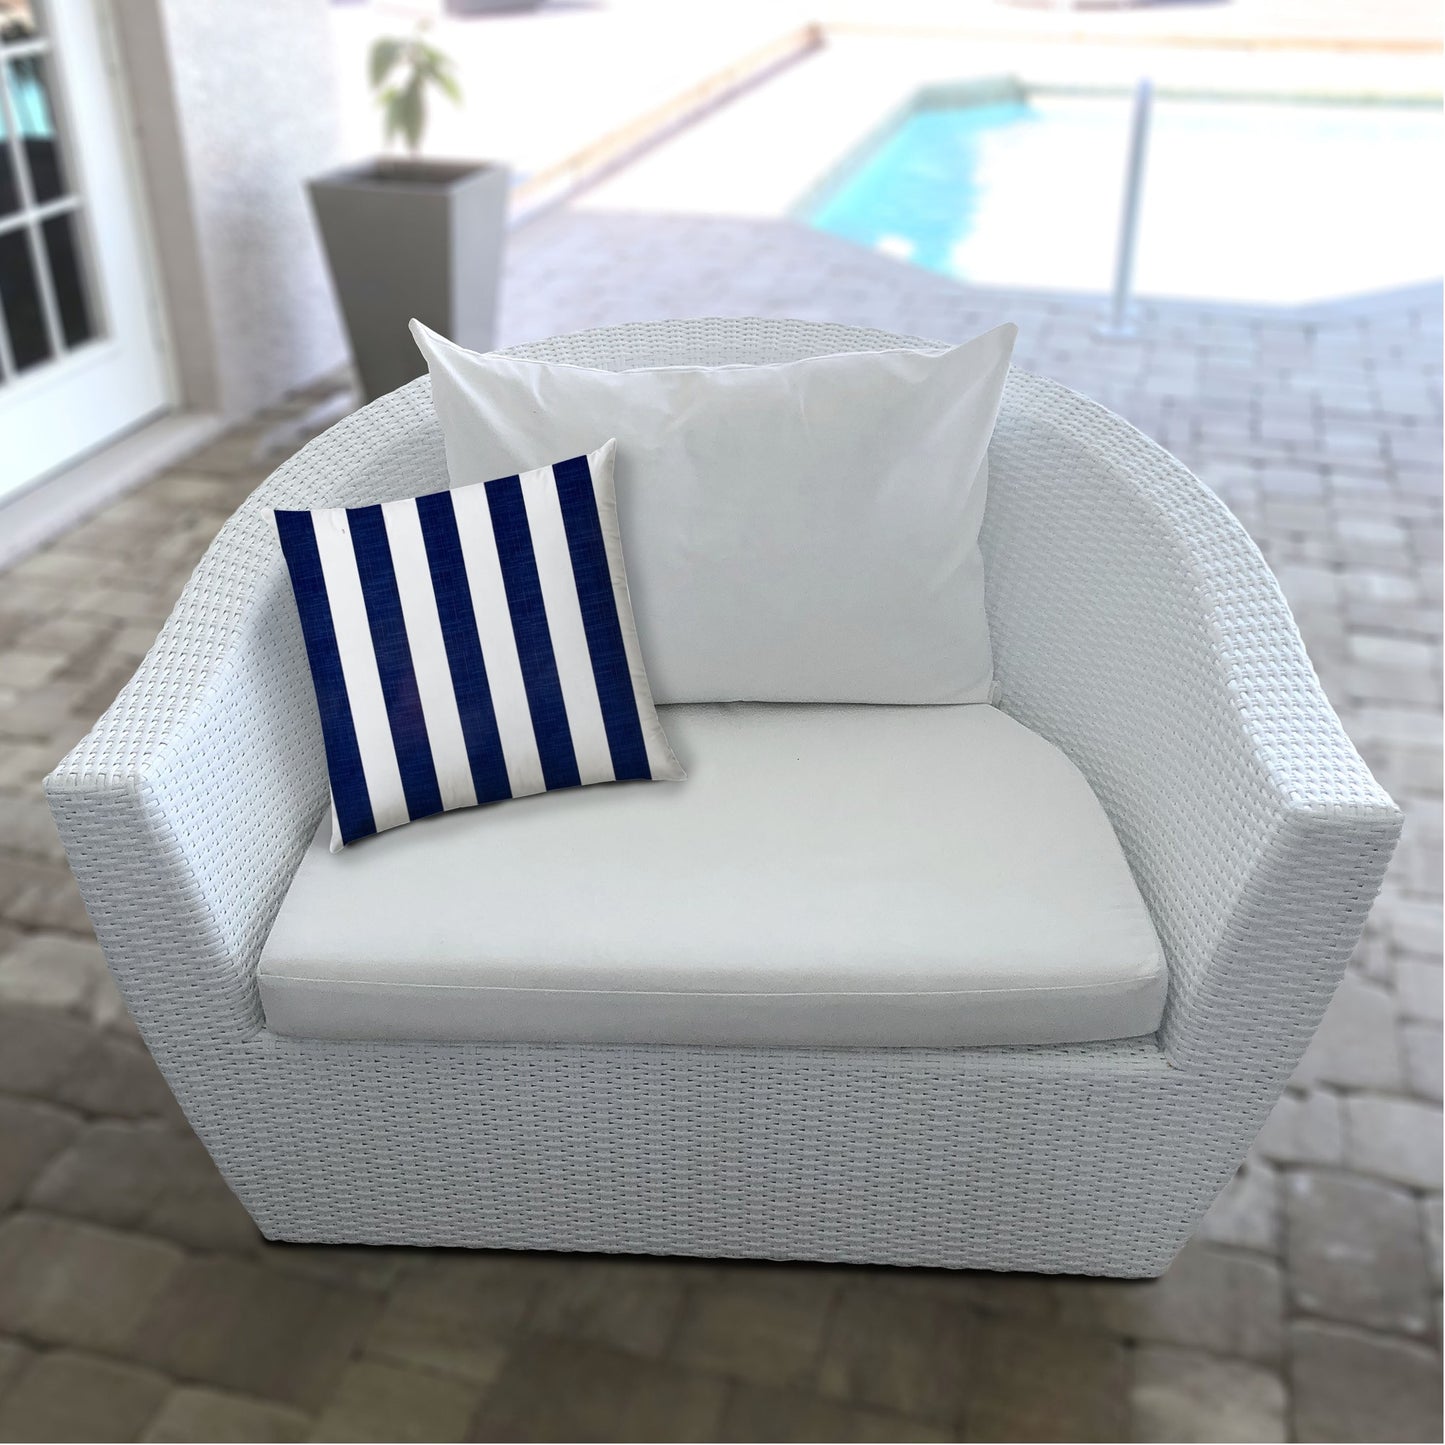 14" X 20" Navy Blue And White Blown Seam Striped Lumbar Indoor Outdoor Pillow